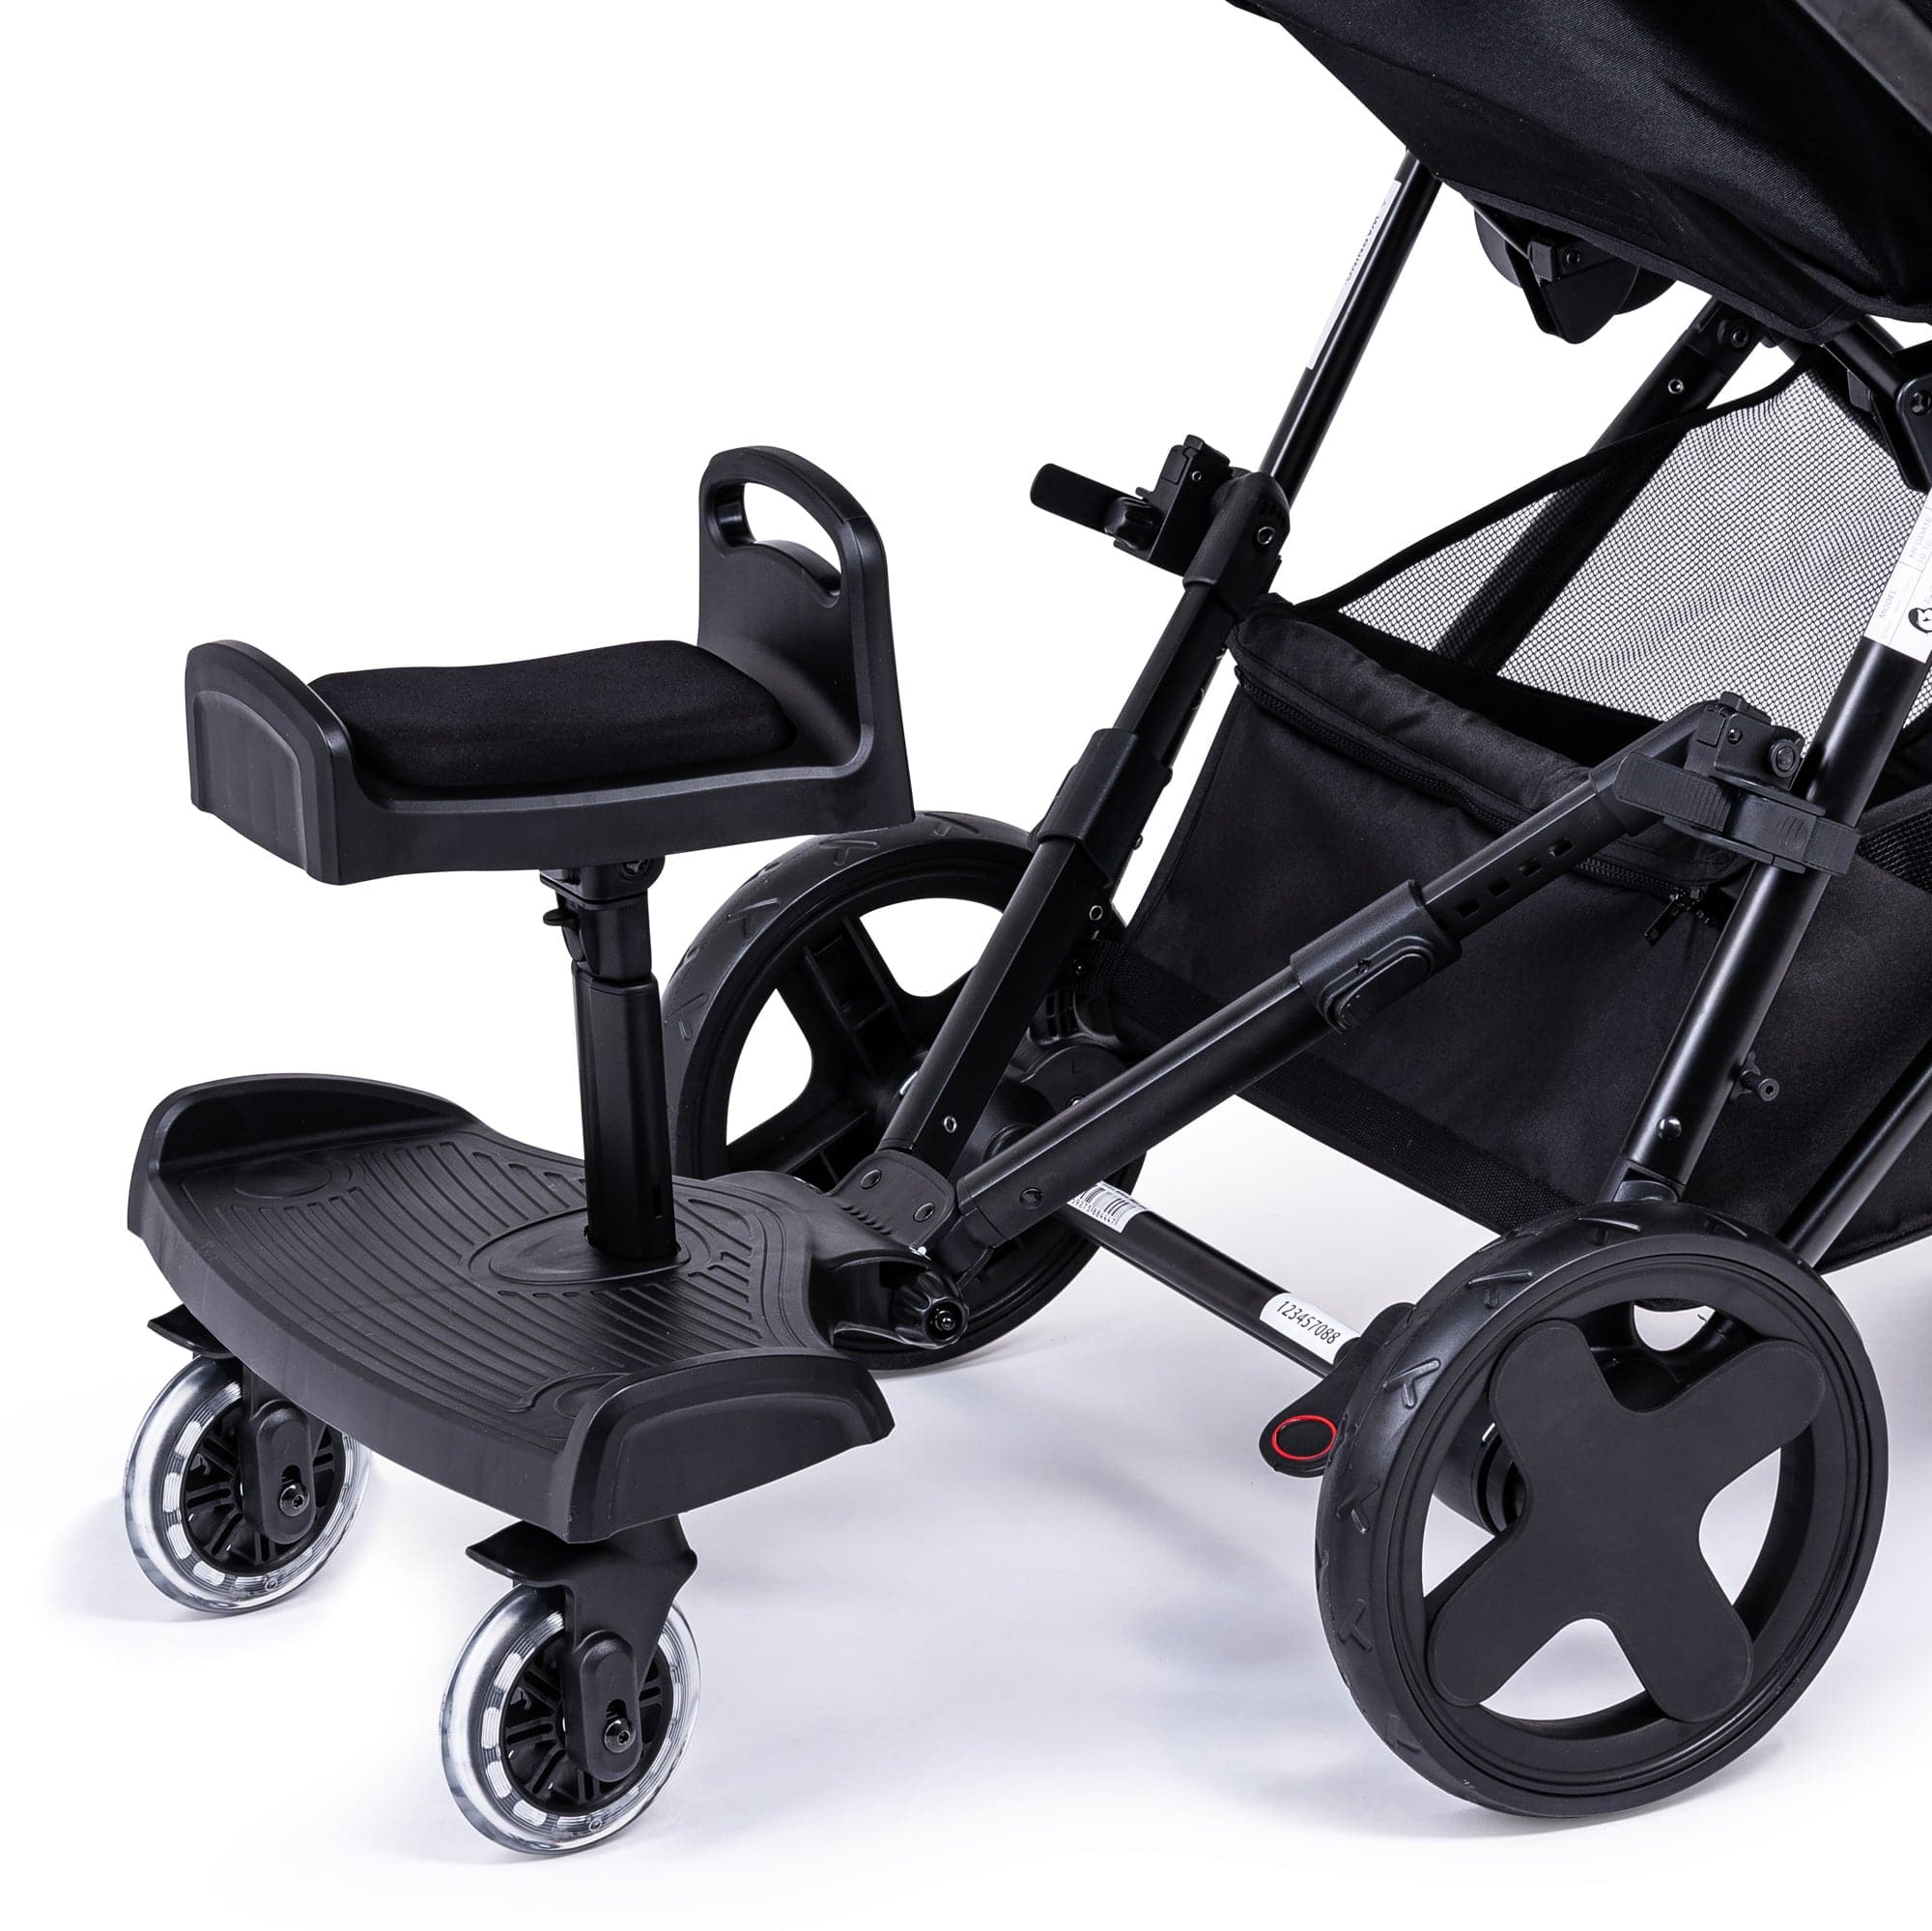 Ride On Board with Saddle Compatible with Babystyle - For Your Little One